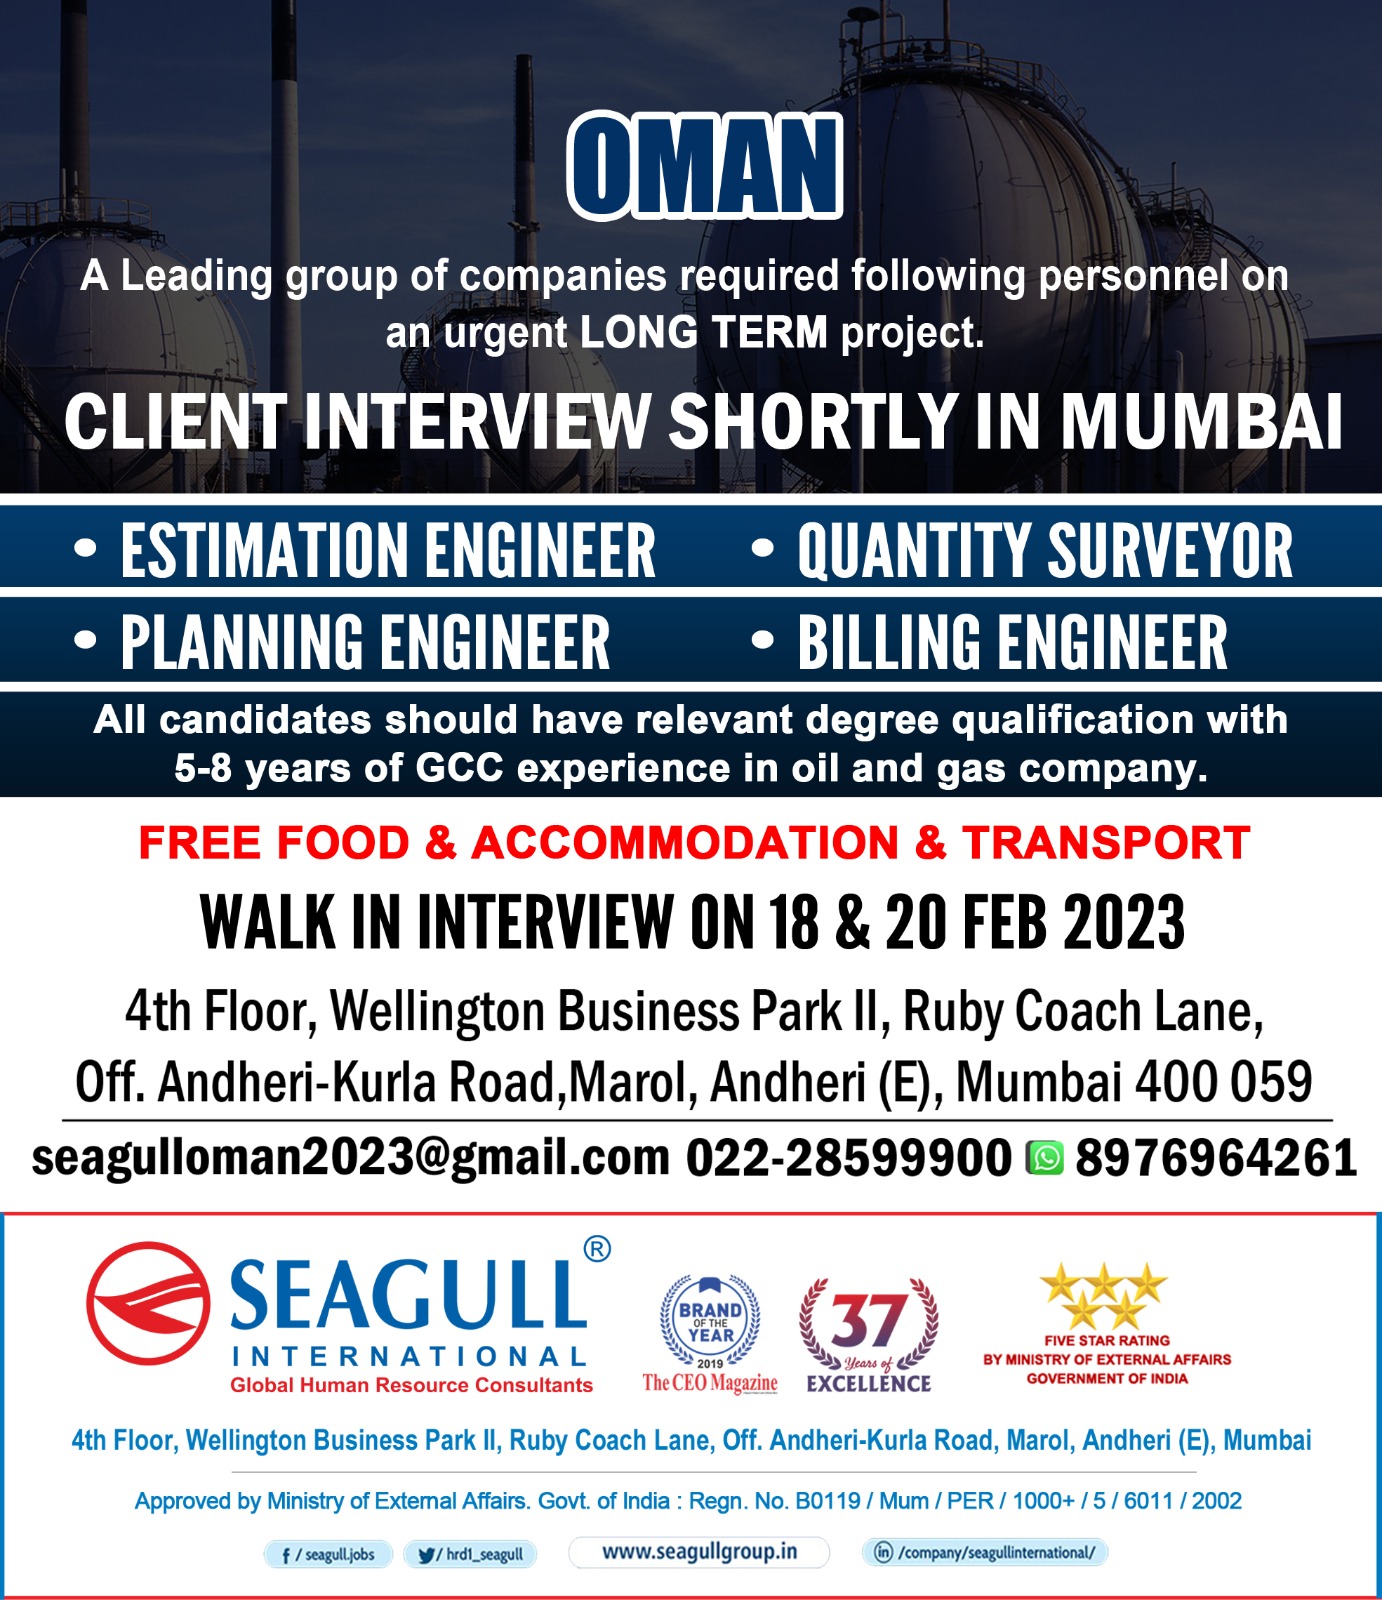 Client Interview in Mumbai for Oman